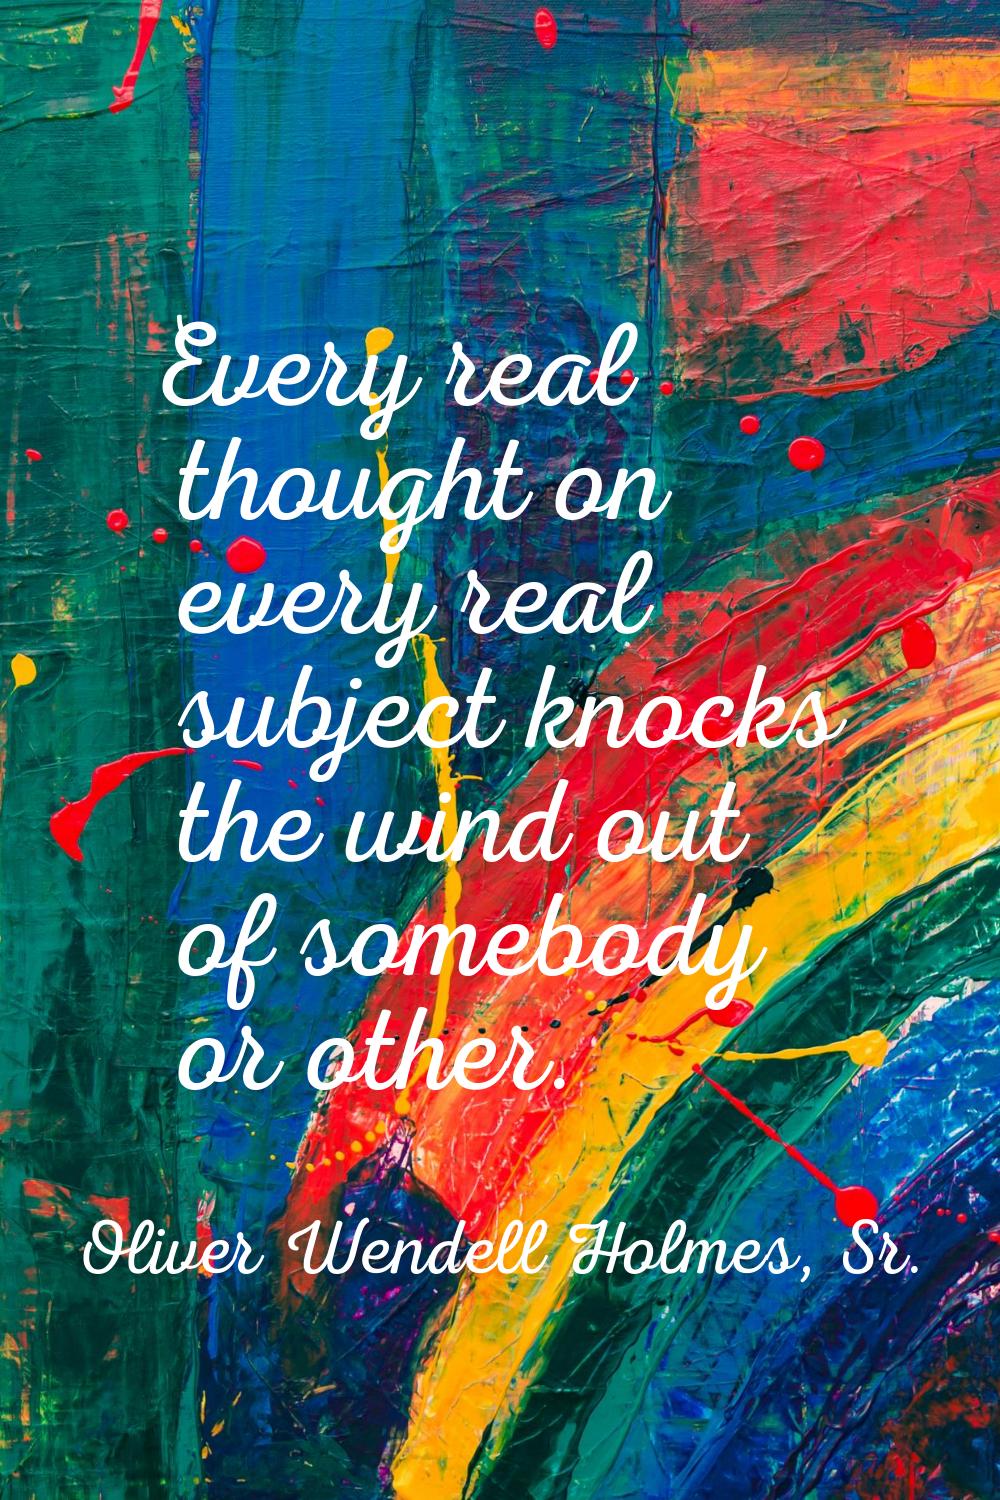 Every real thought on every real subject knocks the wind out of somebody or other.